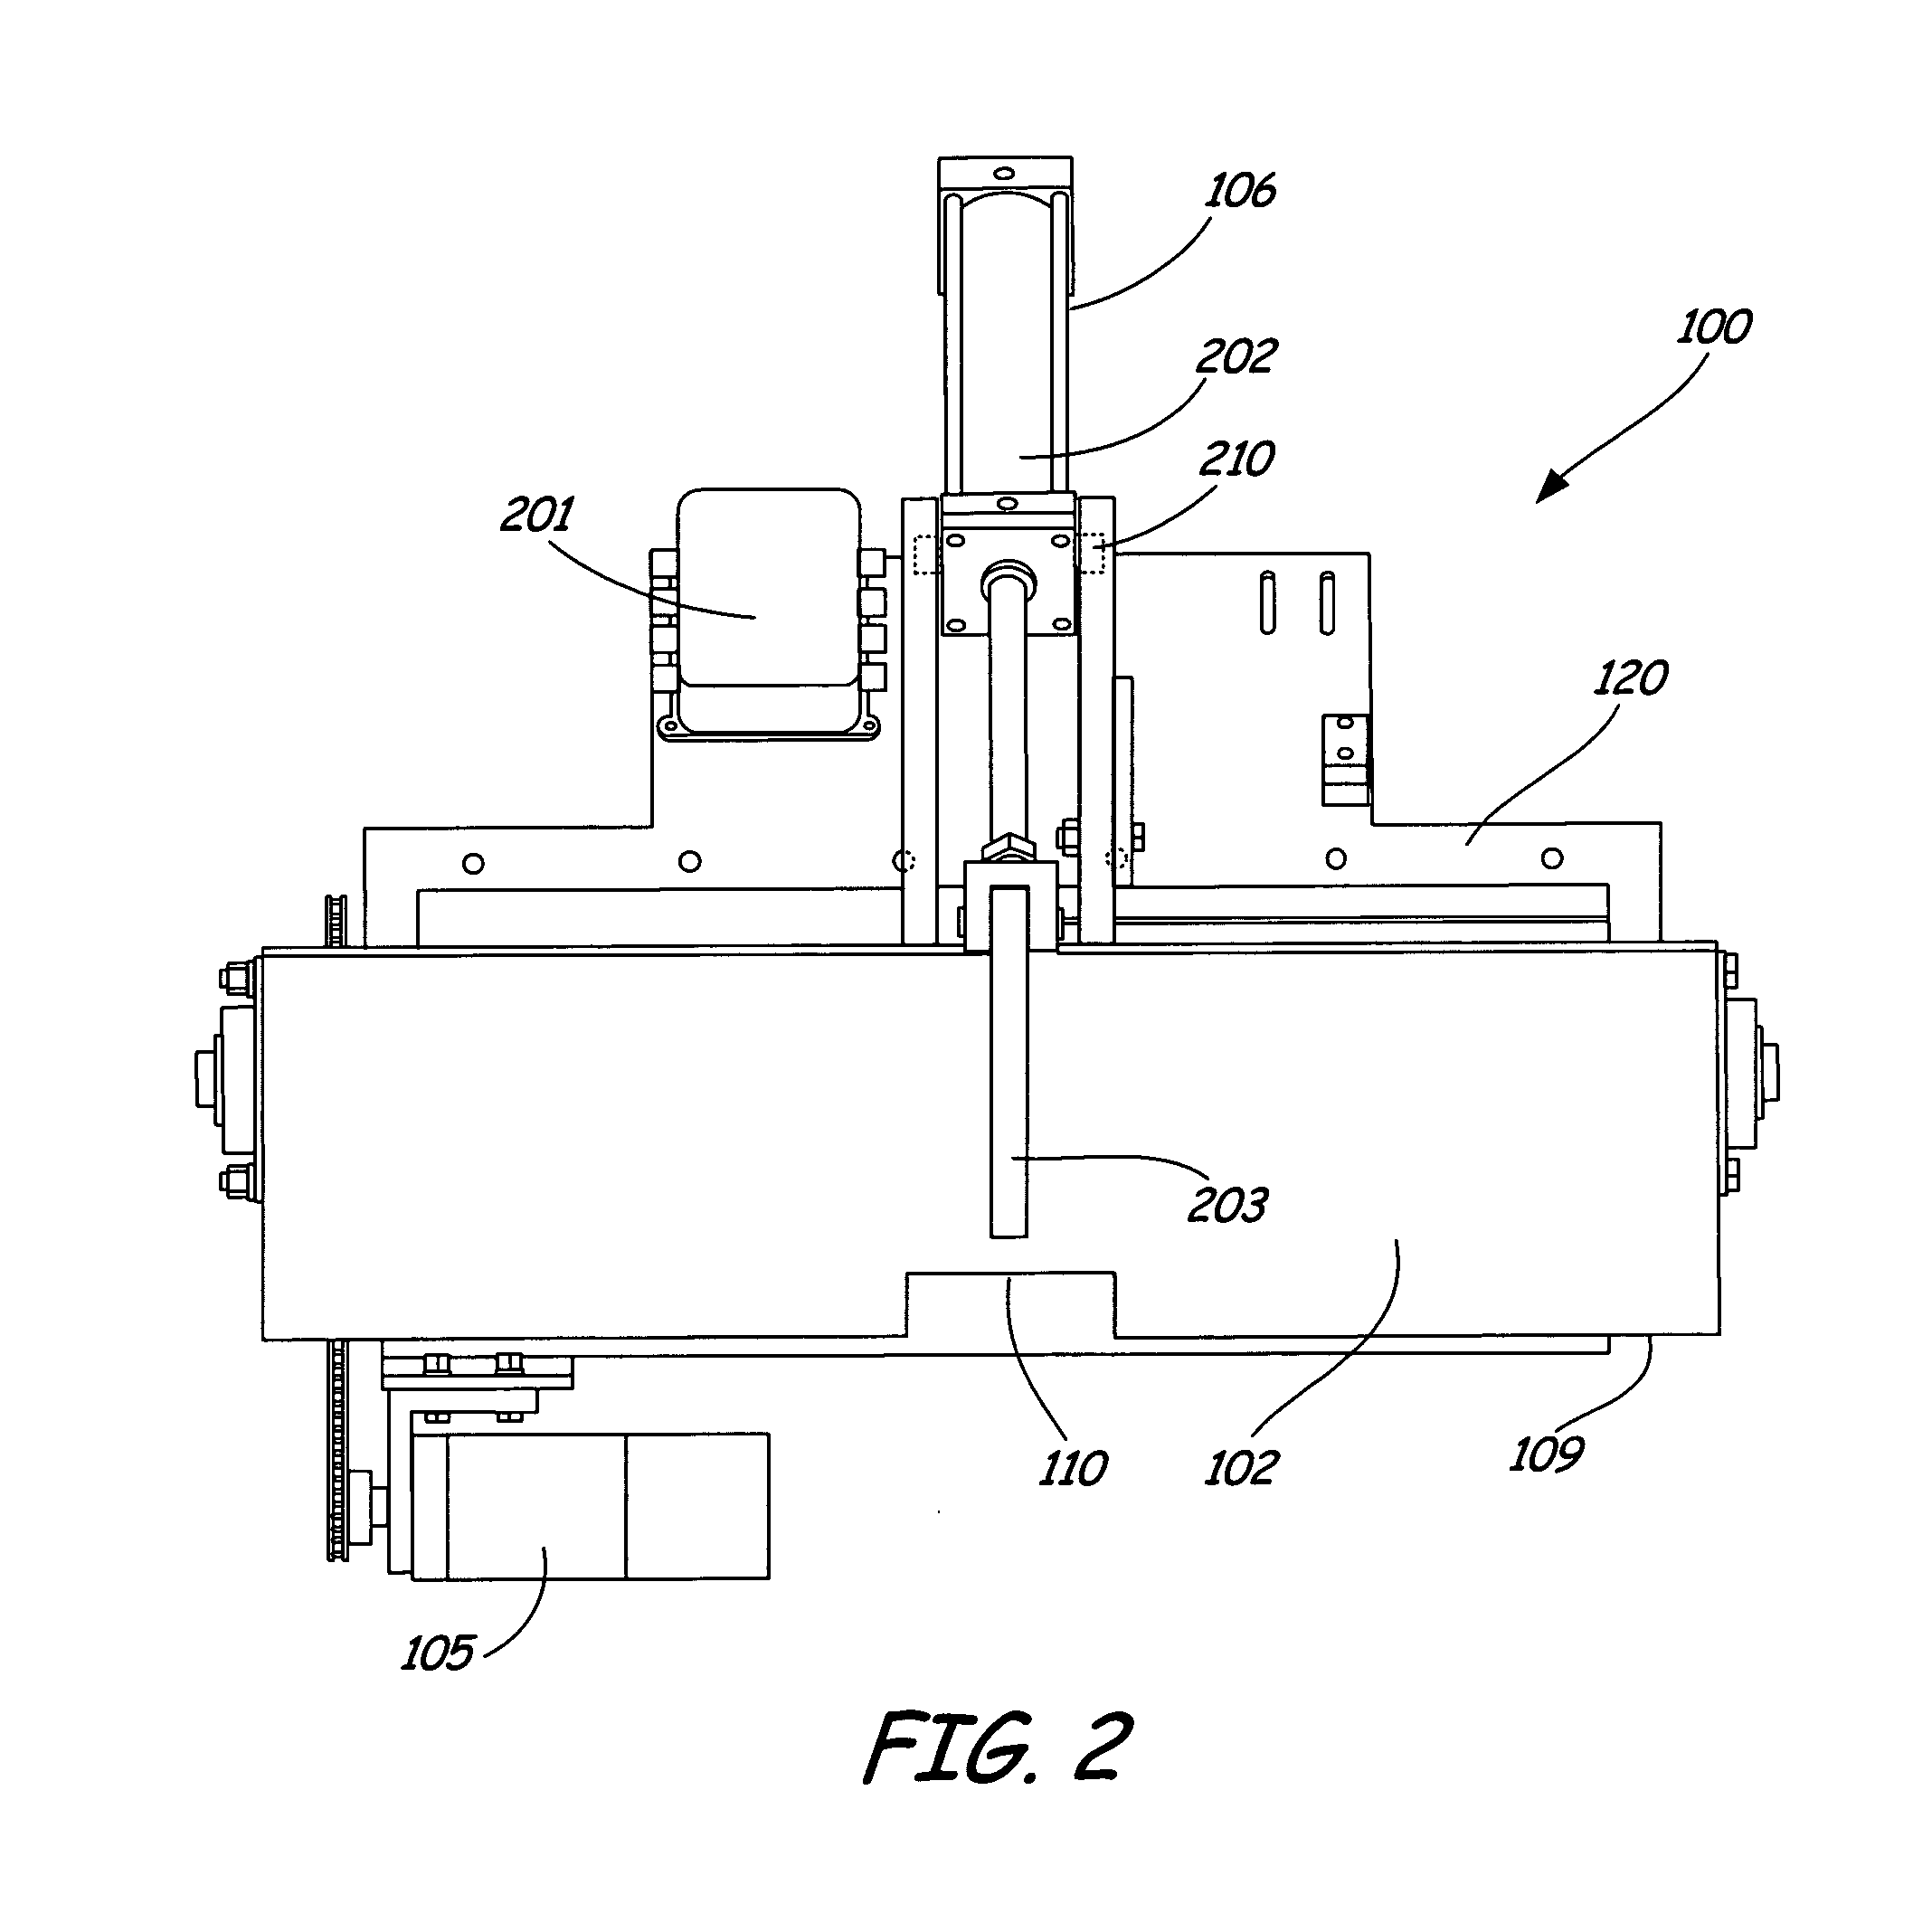 Bin gate for providing variable output flow rates